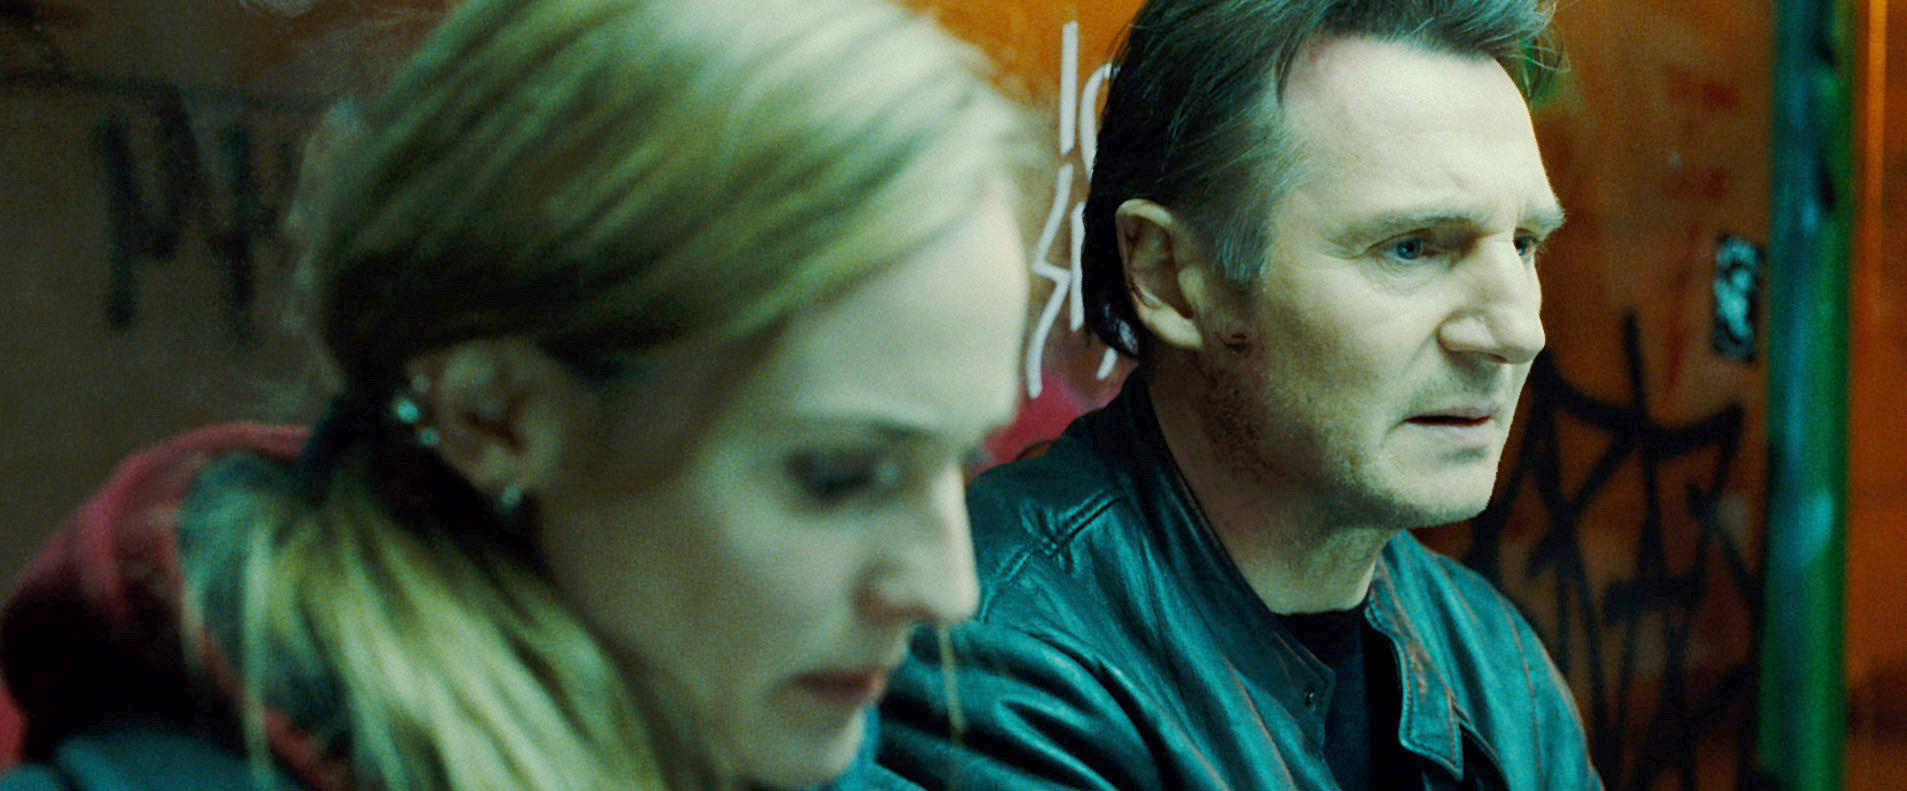 Diane Kruger stars as Gina and Liam Nesson stars as Dr. Martin Harris in Warner Bros. Pictures' Unknown (2011)